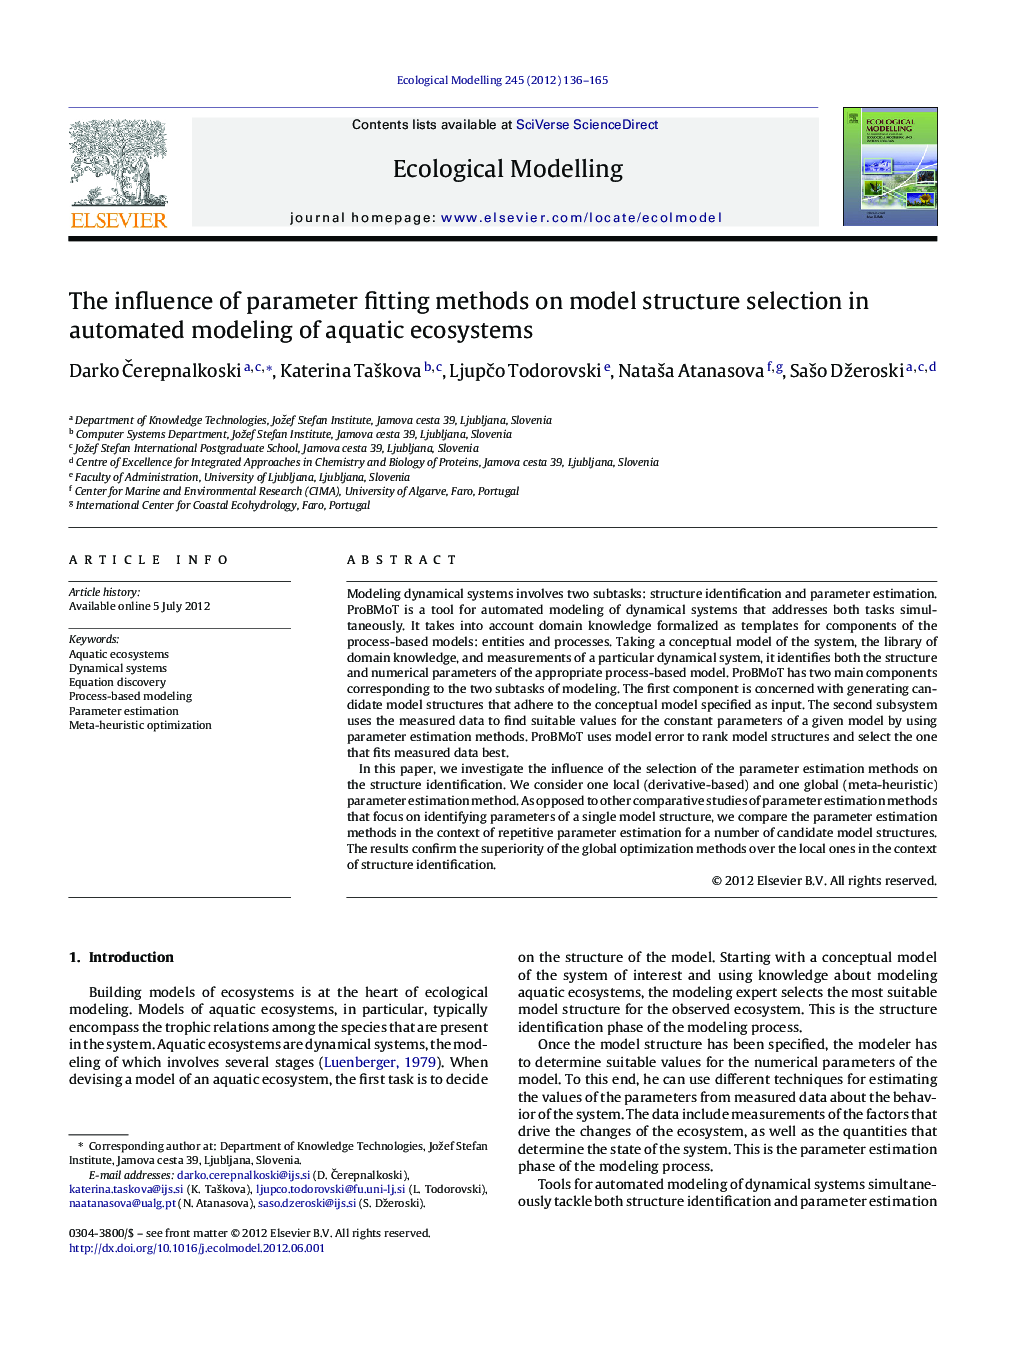 The influence of parameter fitting methods on model structure selection in automated modeling of aquatic ecosystems